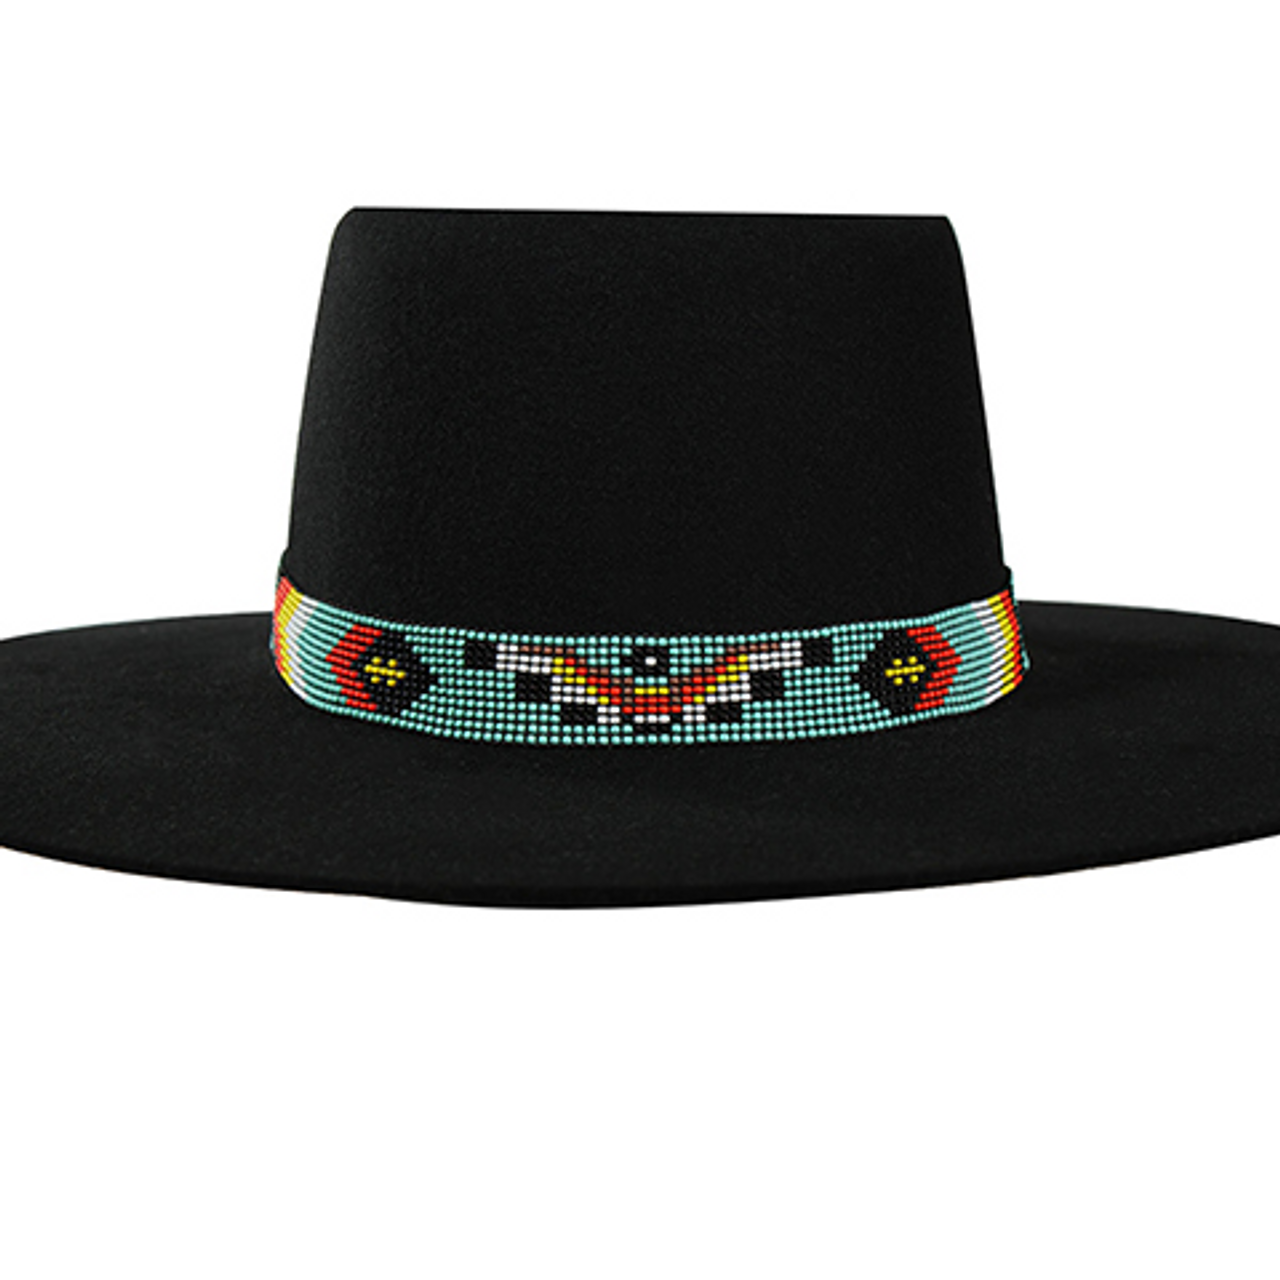 Hat Bands – The DJF